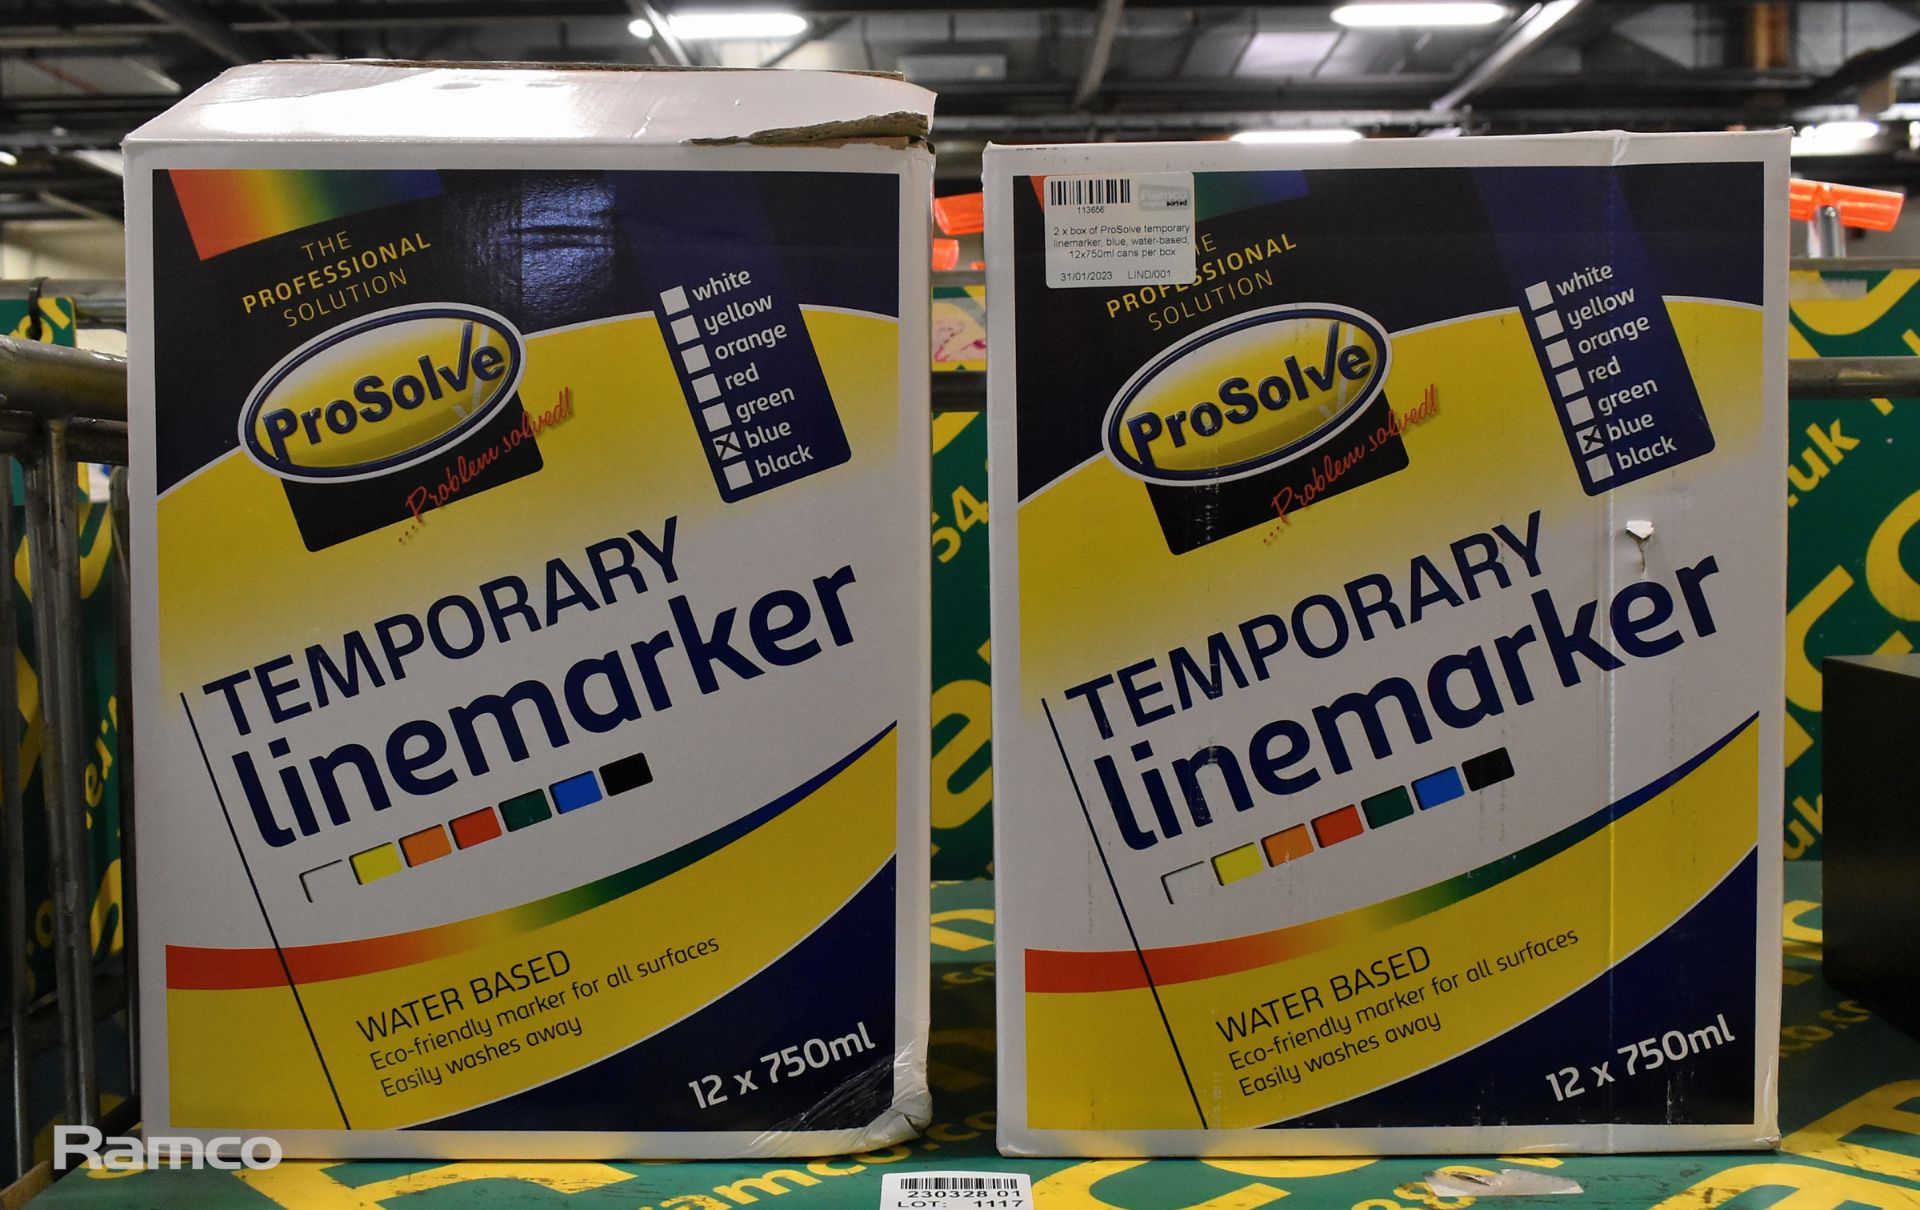 2x boxes of ProSolve temporary linemarker - blue - water-based - 12 x 750ml cans per box - Image 4 of 4